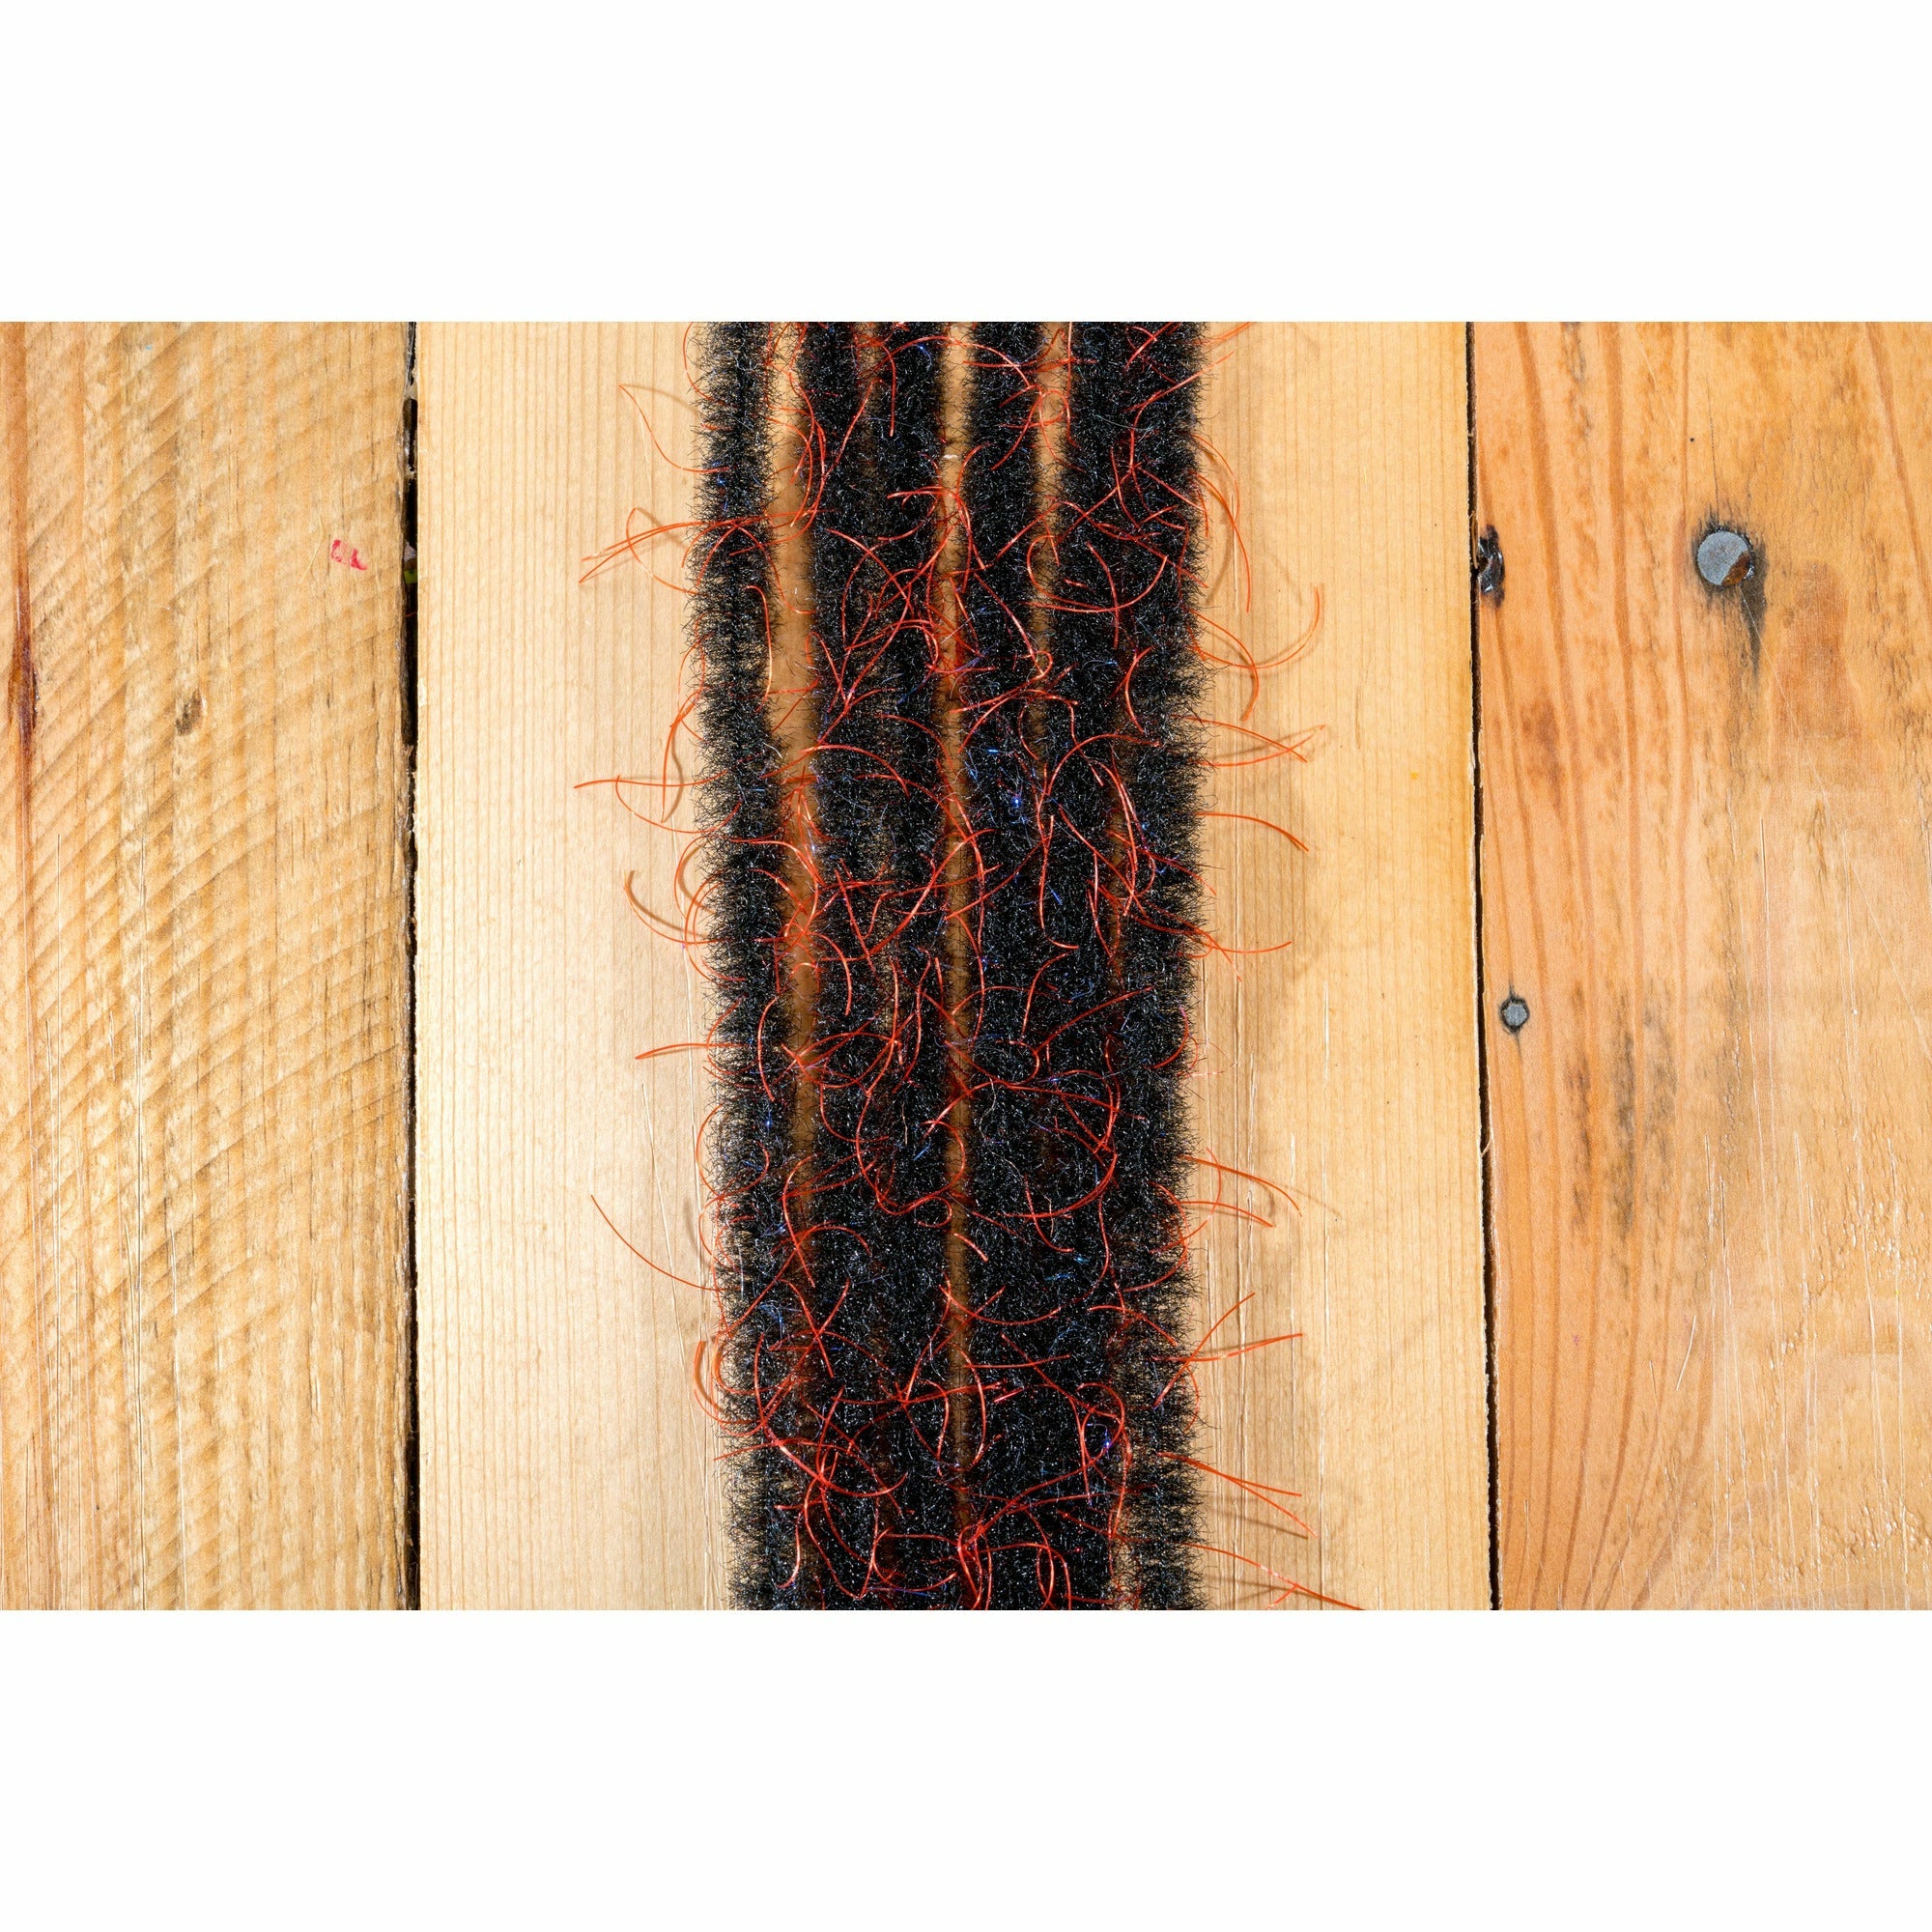 EP Wooly Critter Brush .5" - Black & Red